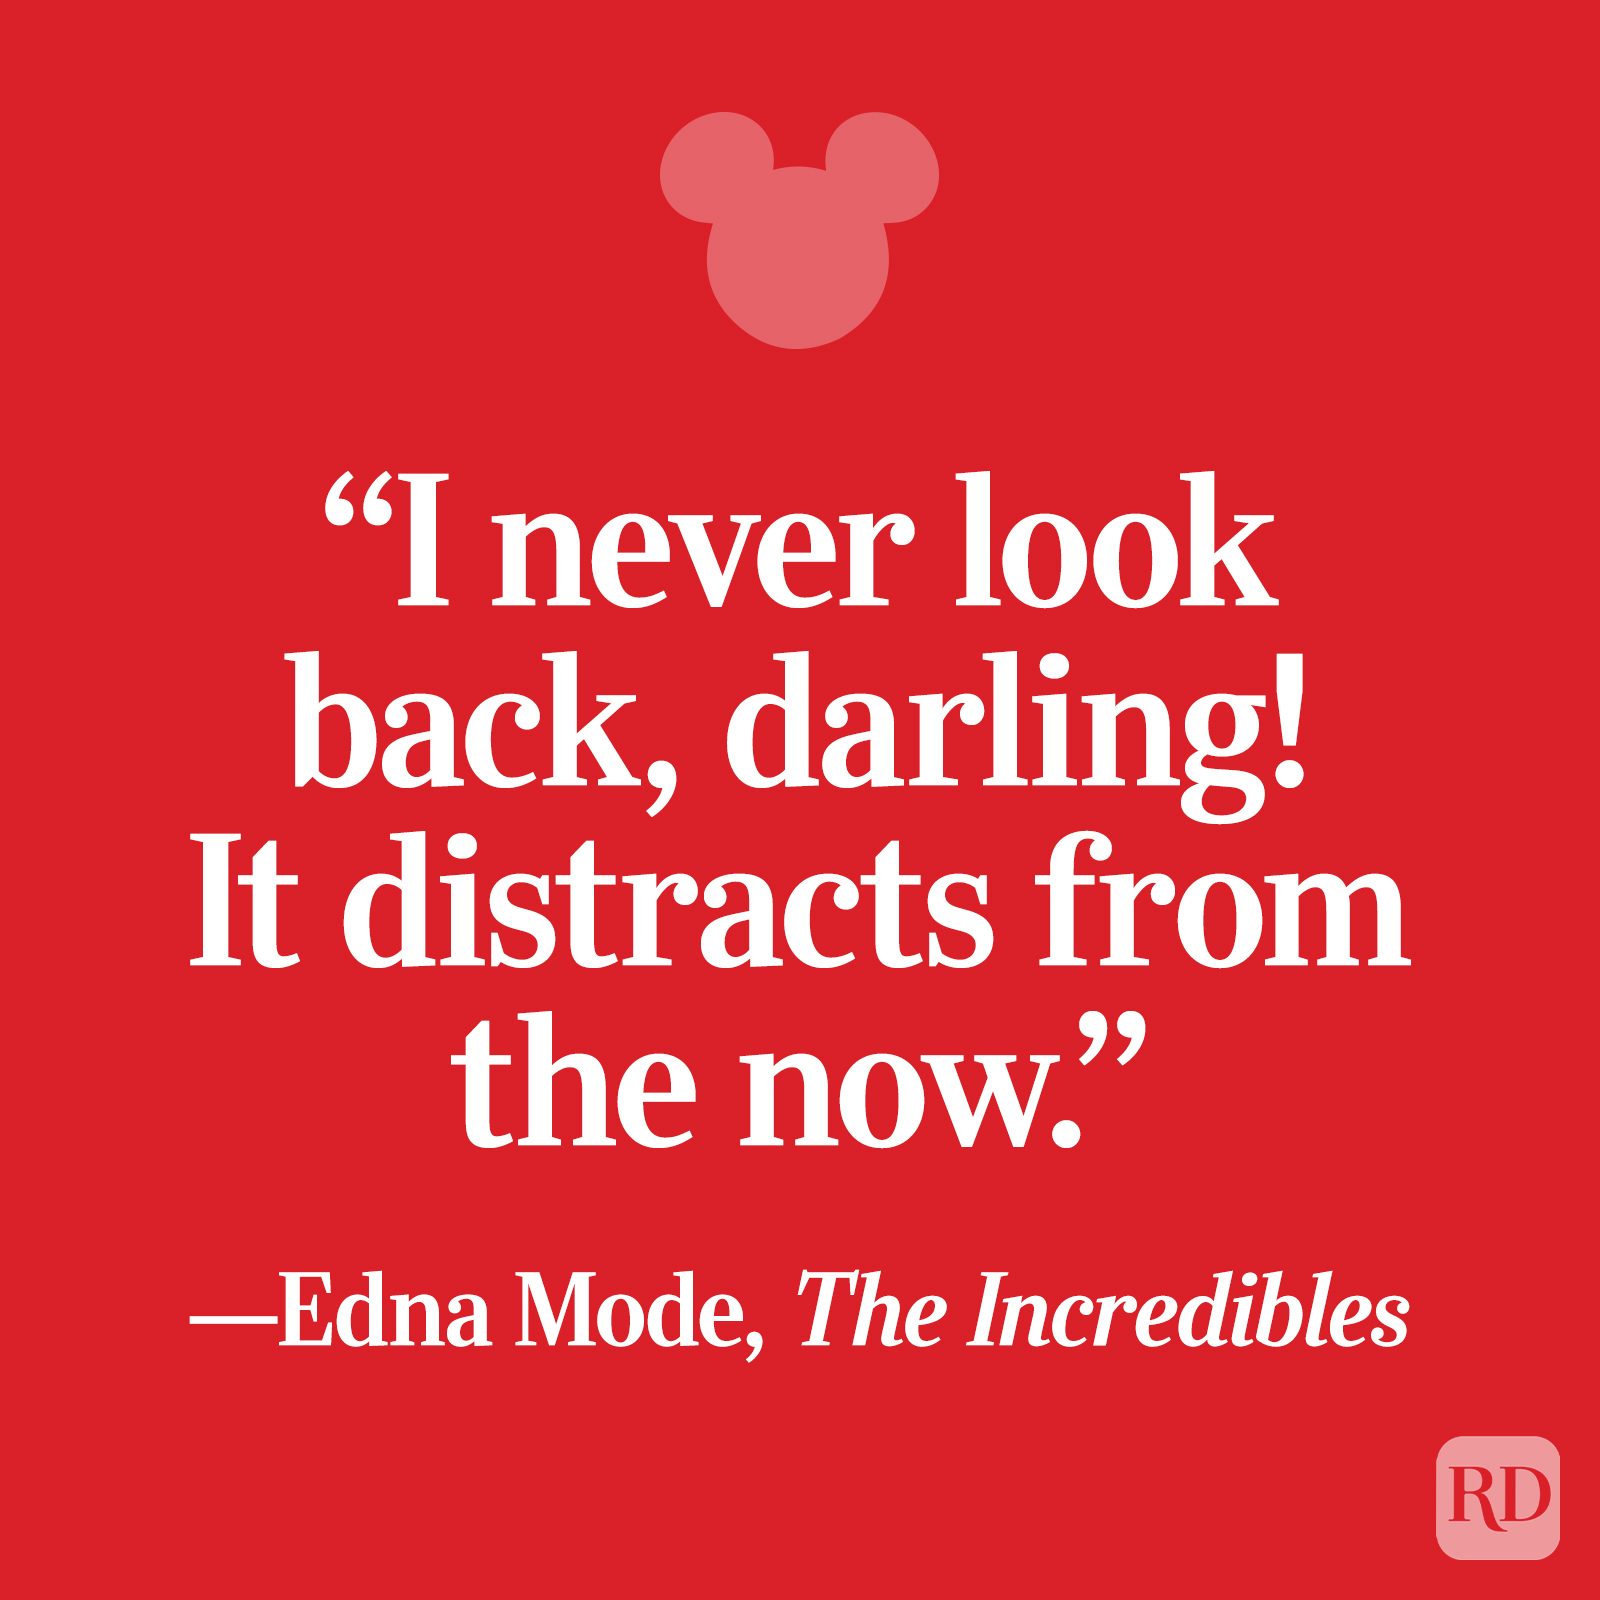 disney movie quotes about life and love